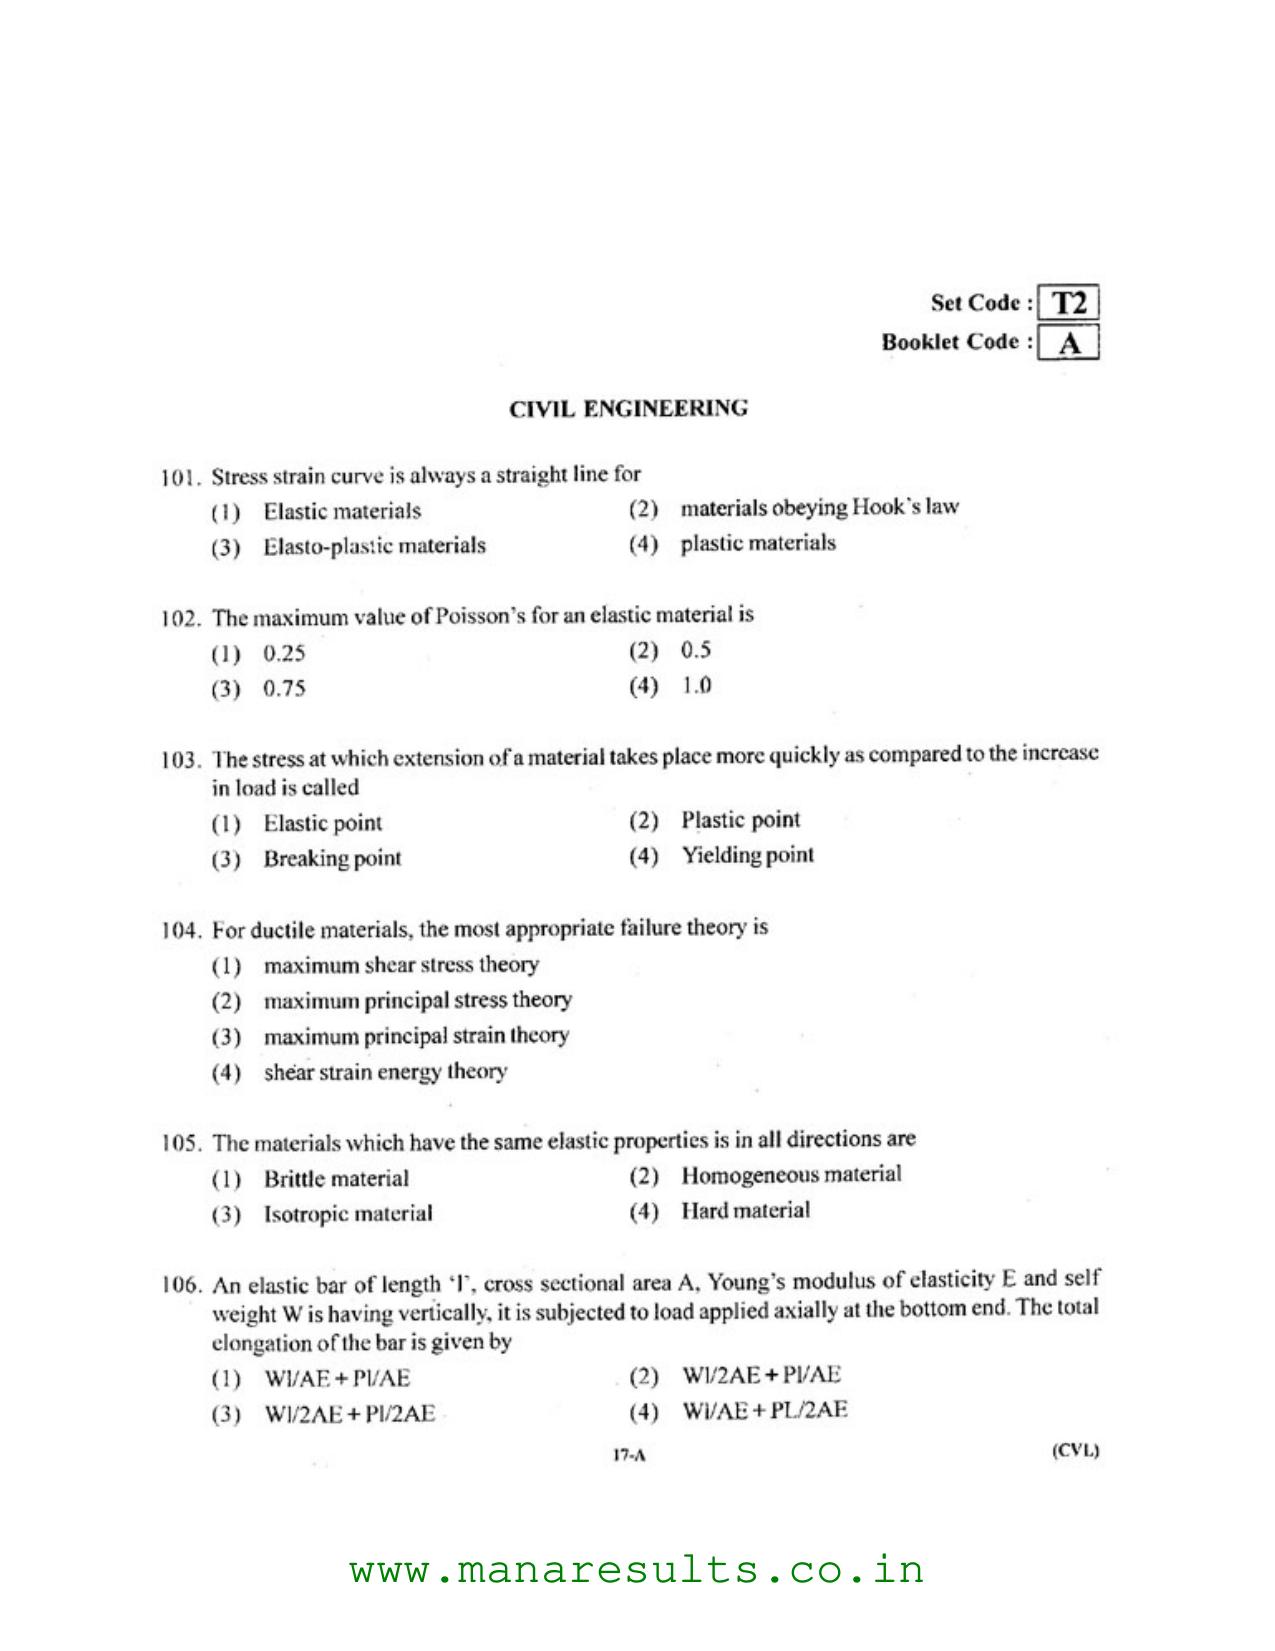 AP ECET 2016 Civil Engineering Old Previous Question Papers - Page 16